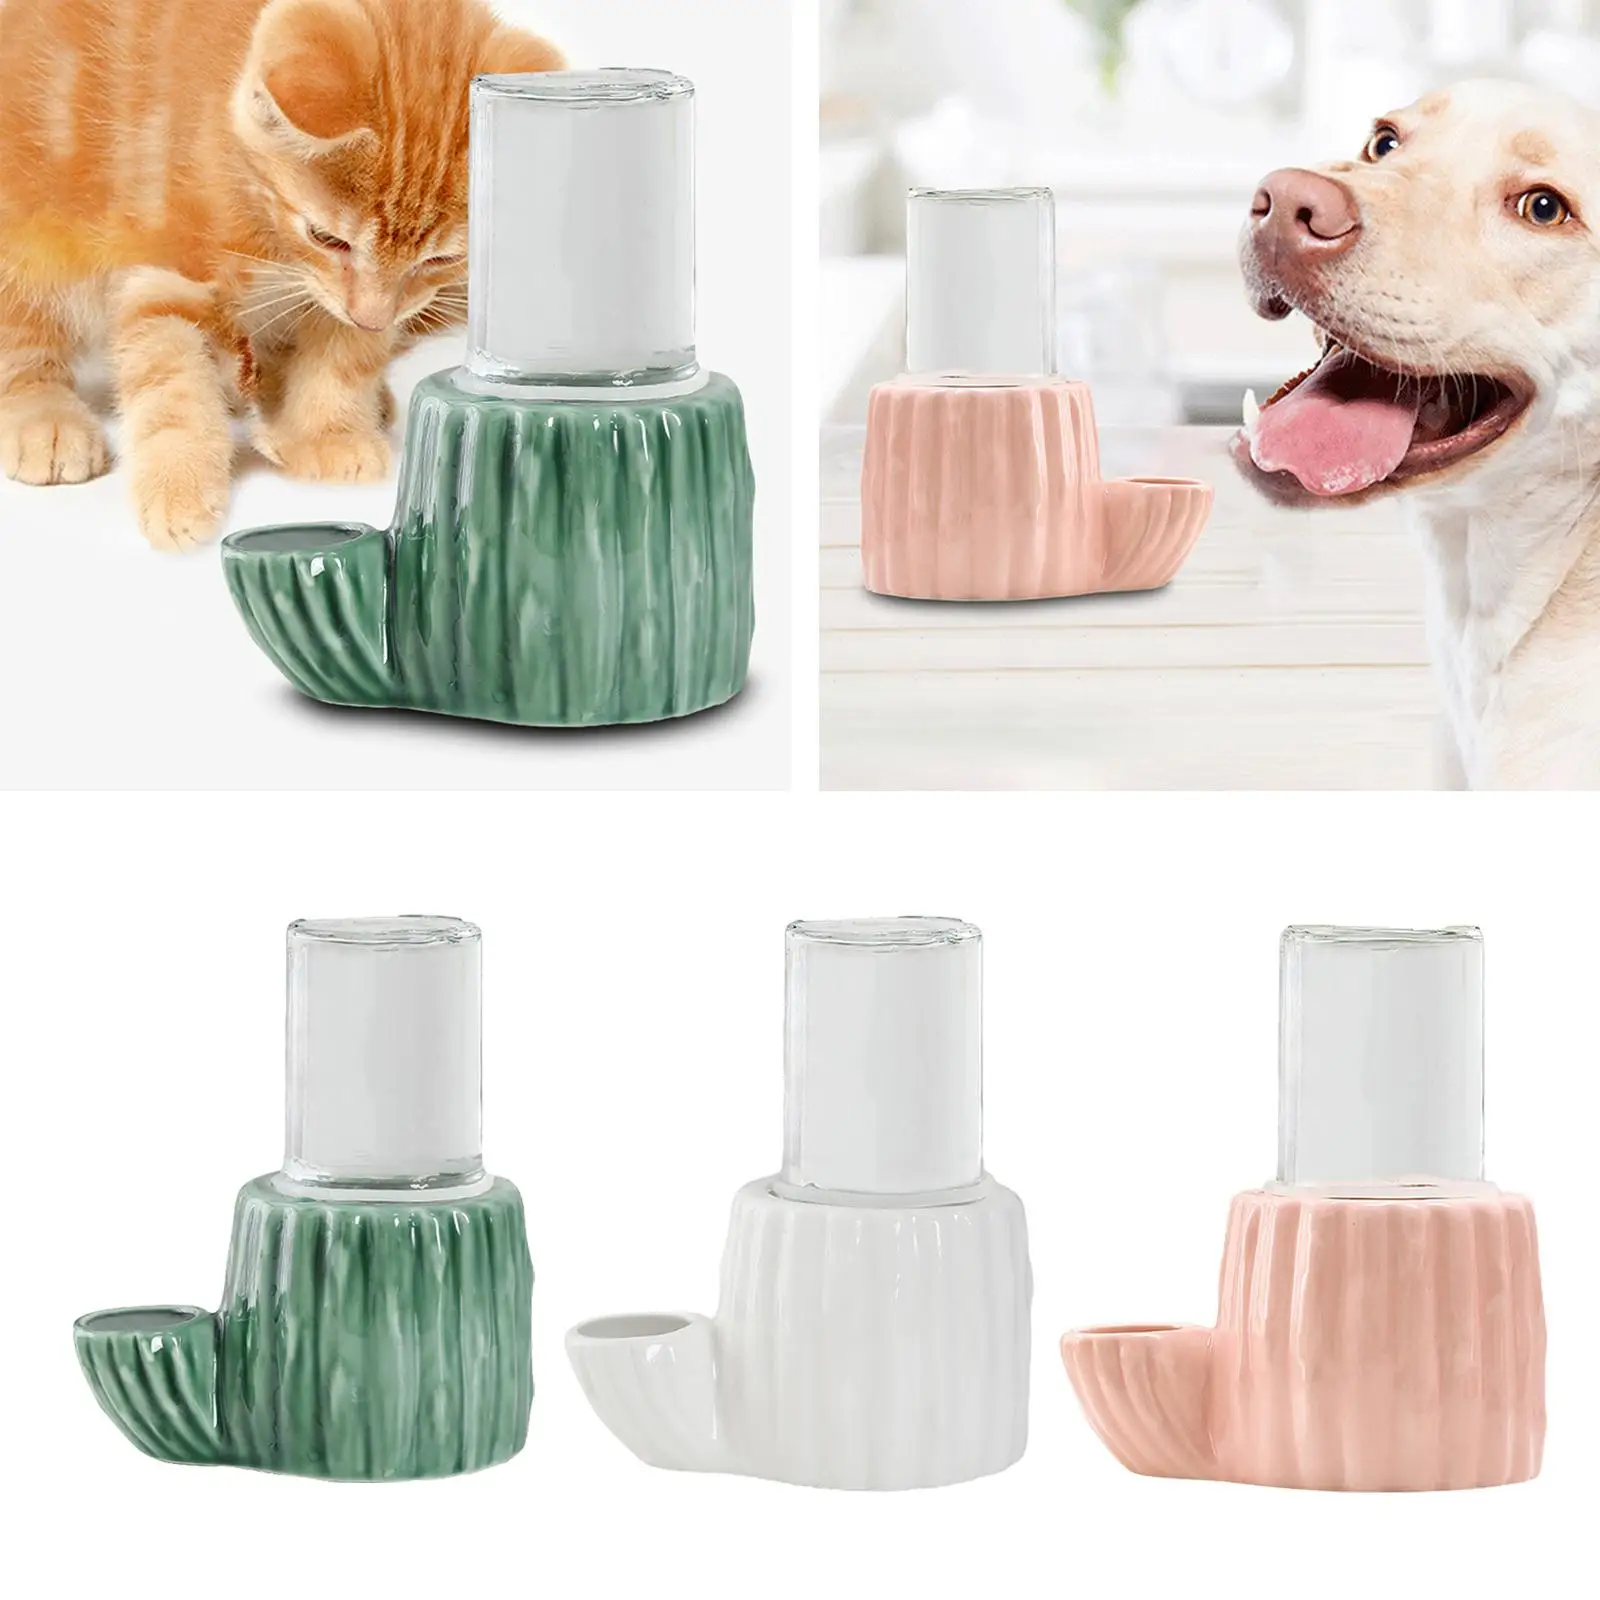 Automatic Water Dispenser Feeder, Dispensing Bowl Cat Drinking Fountain for Cats Dogs